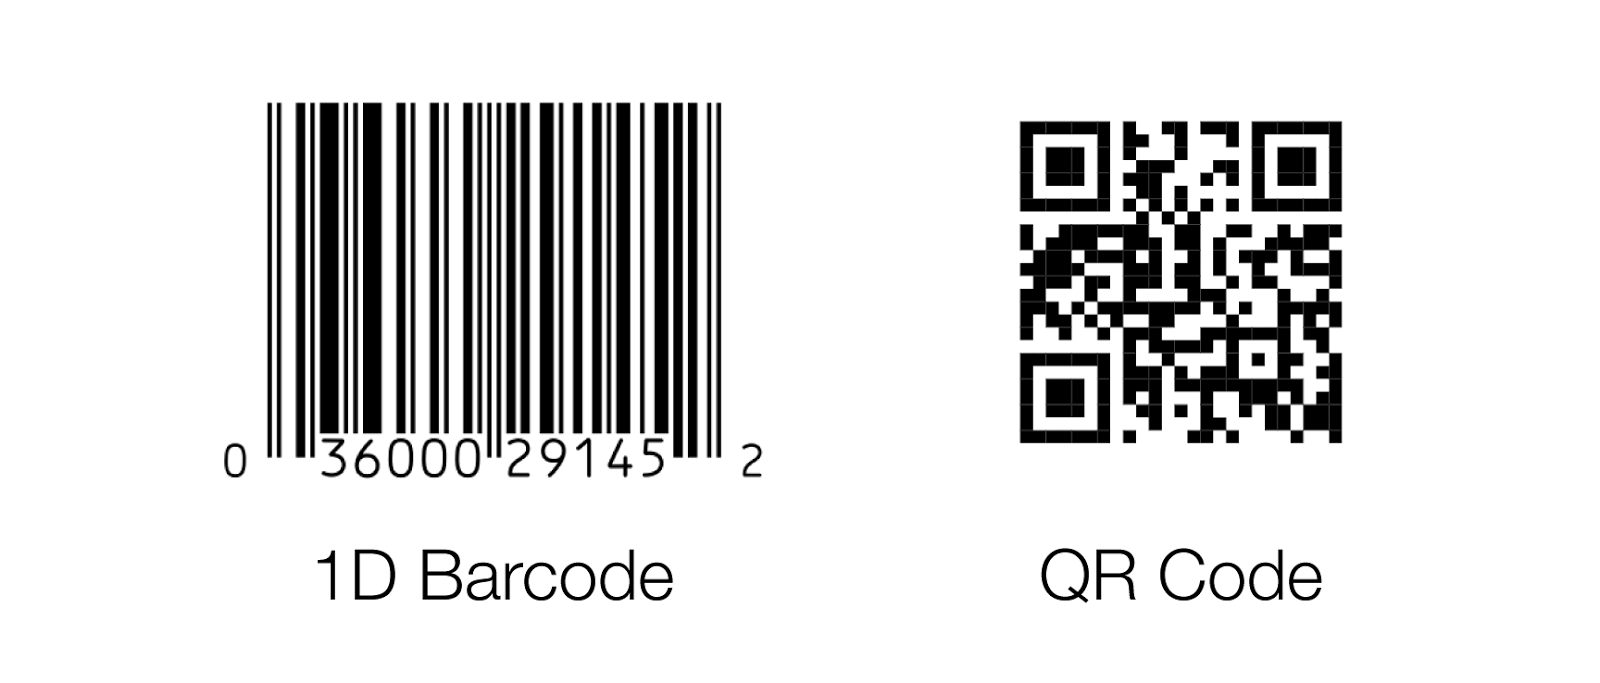 qrcode and barcode